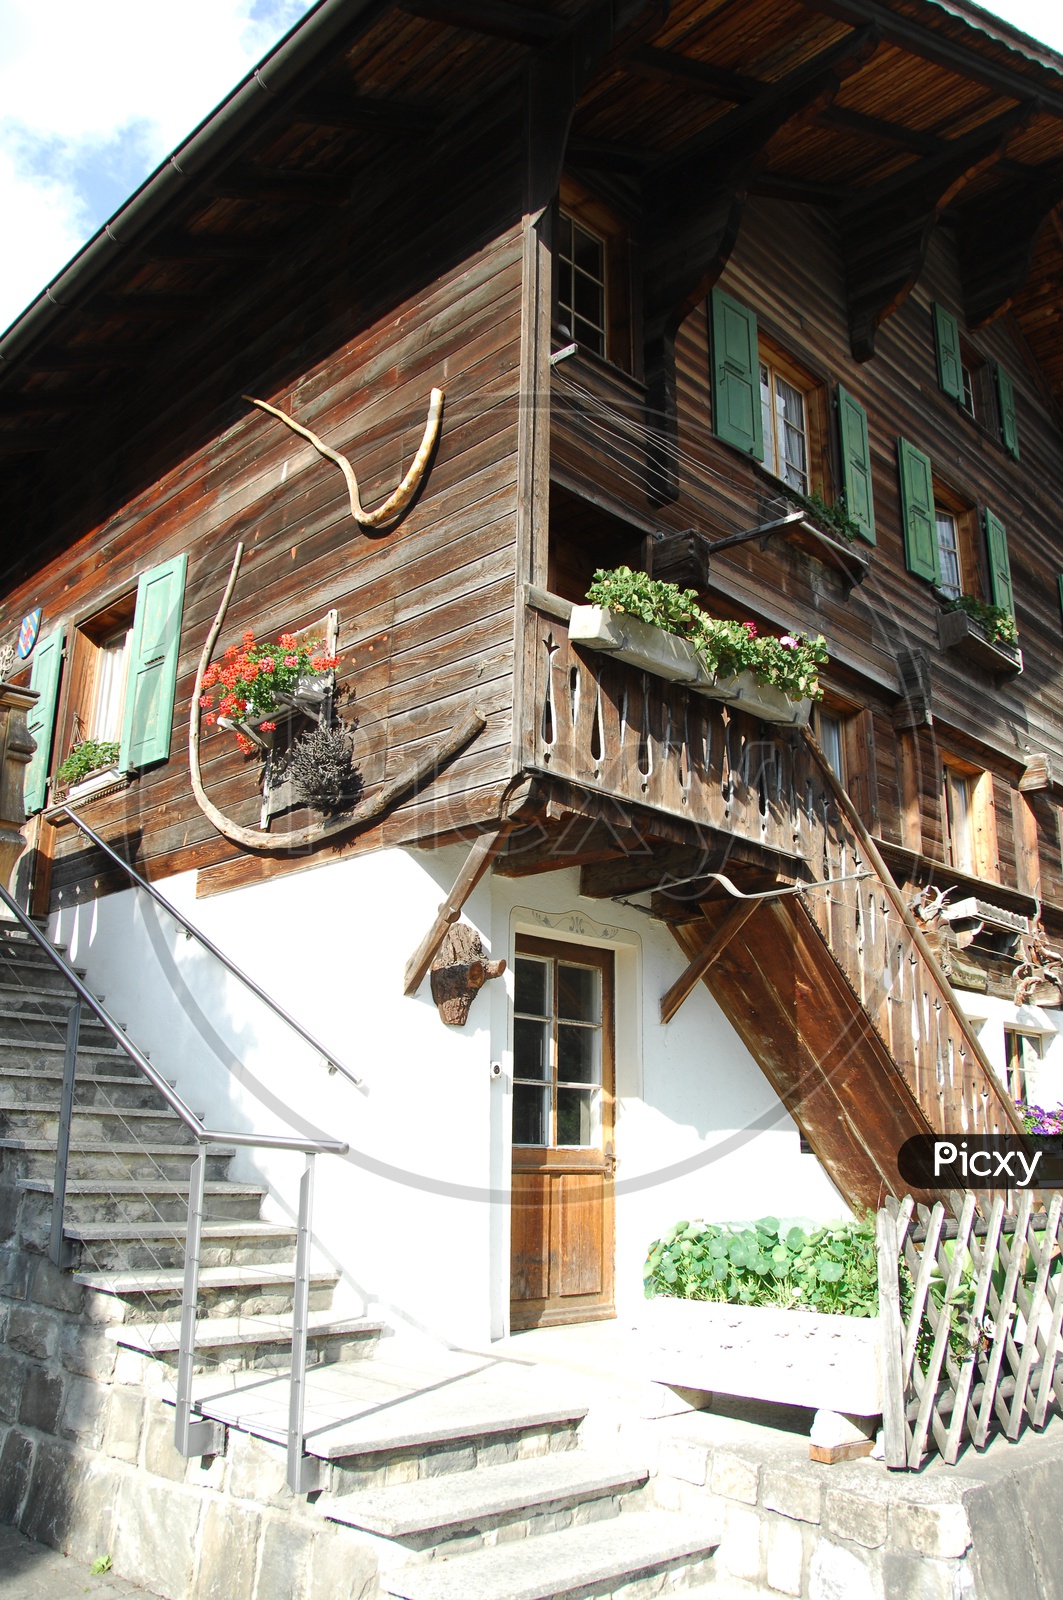 Architecture of Wooden Houses In Switzerland